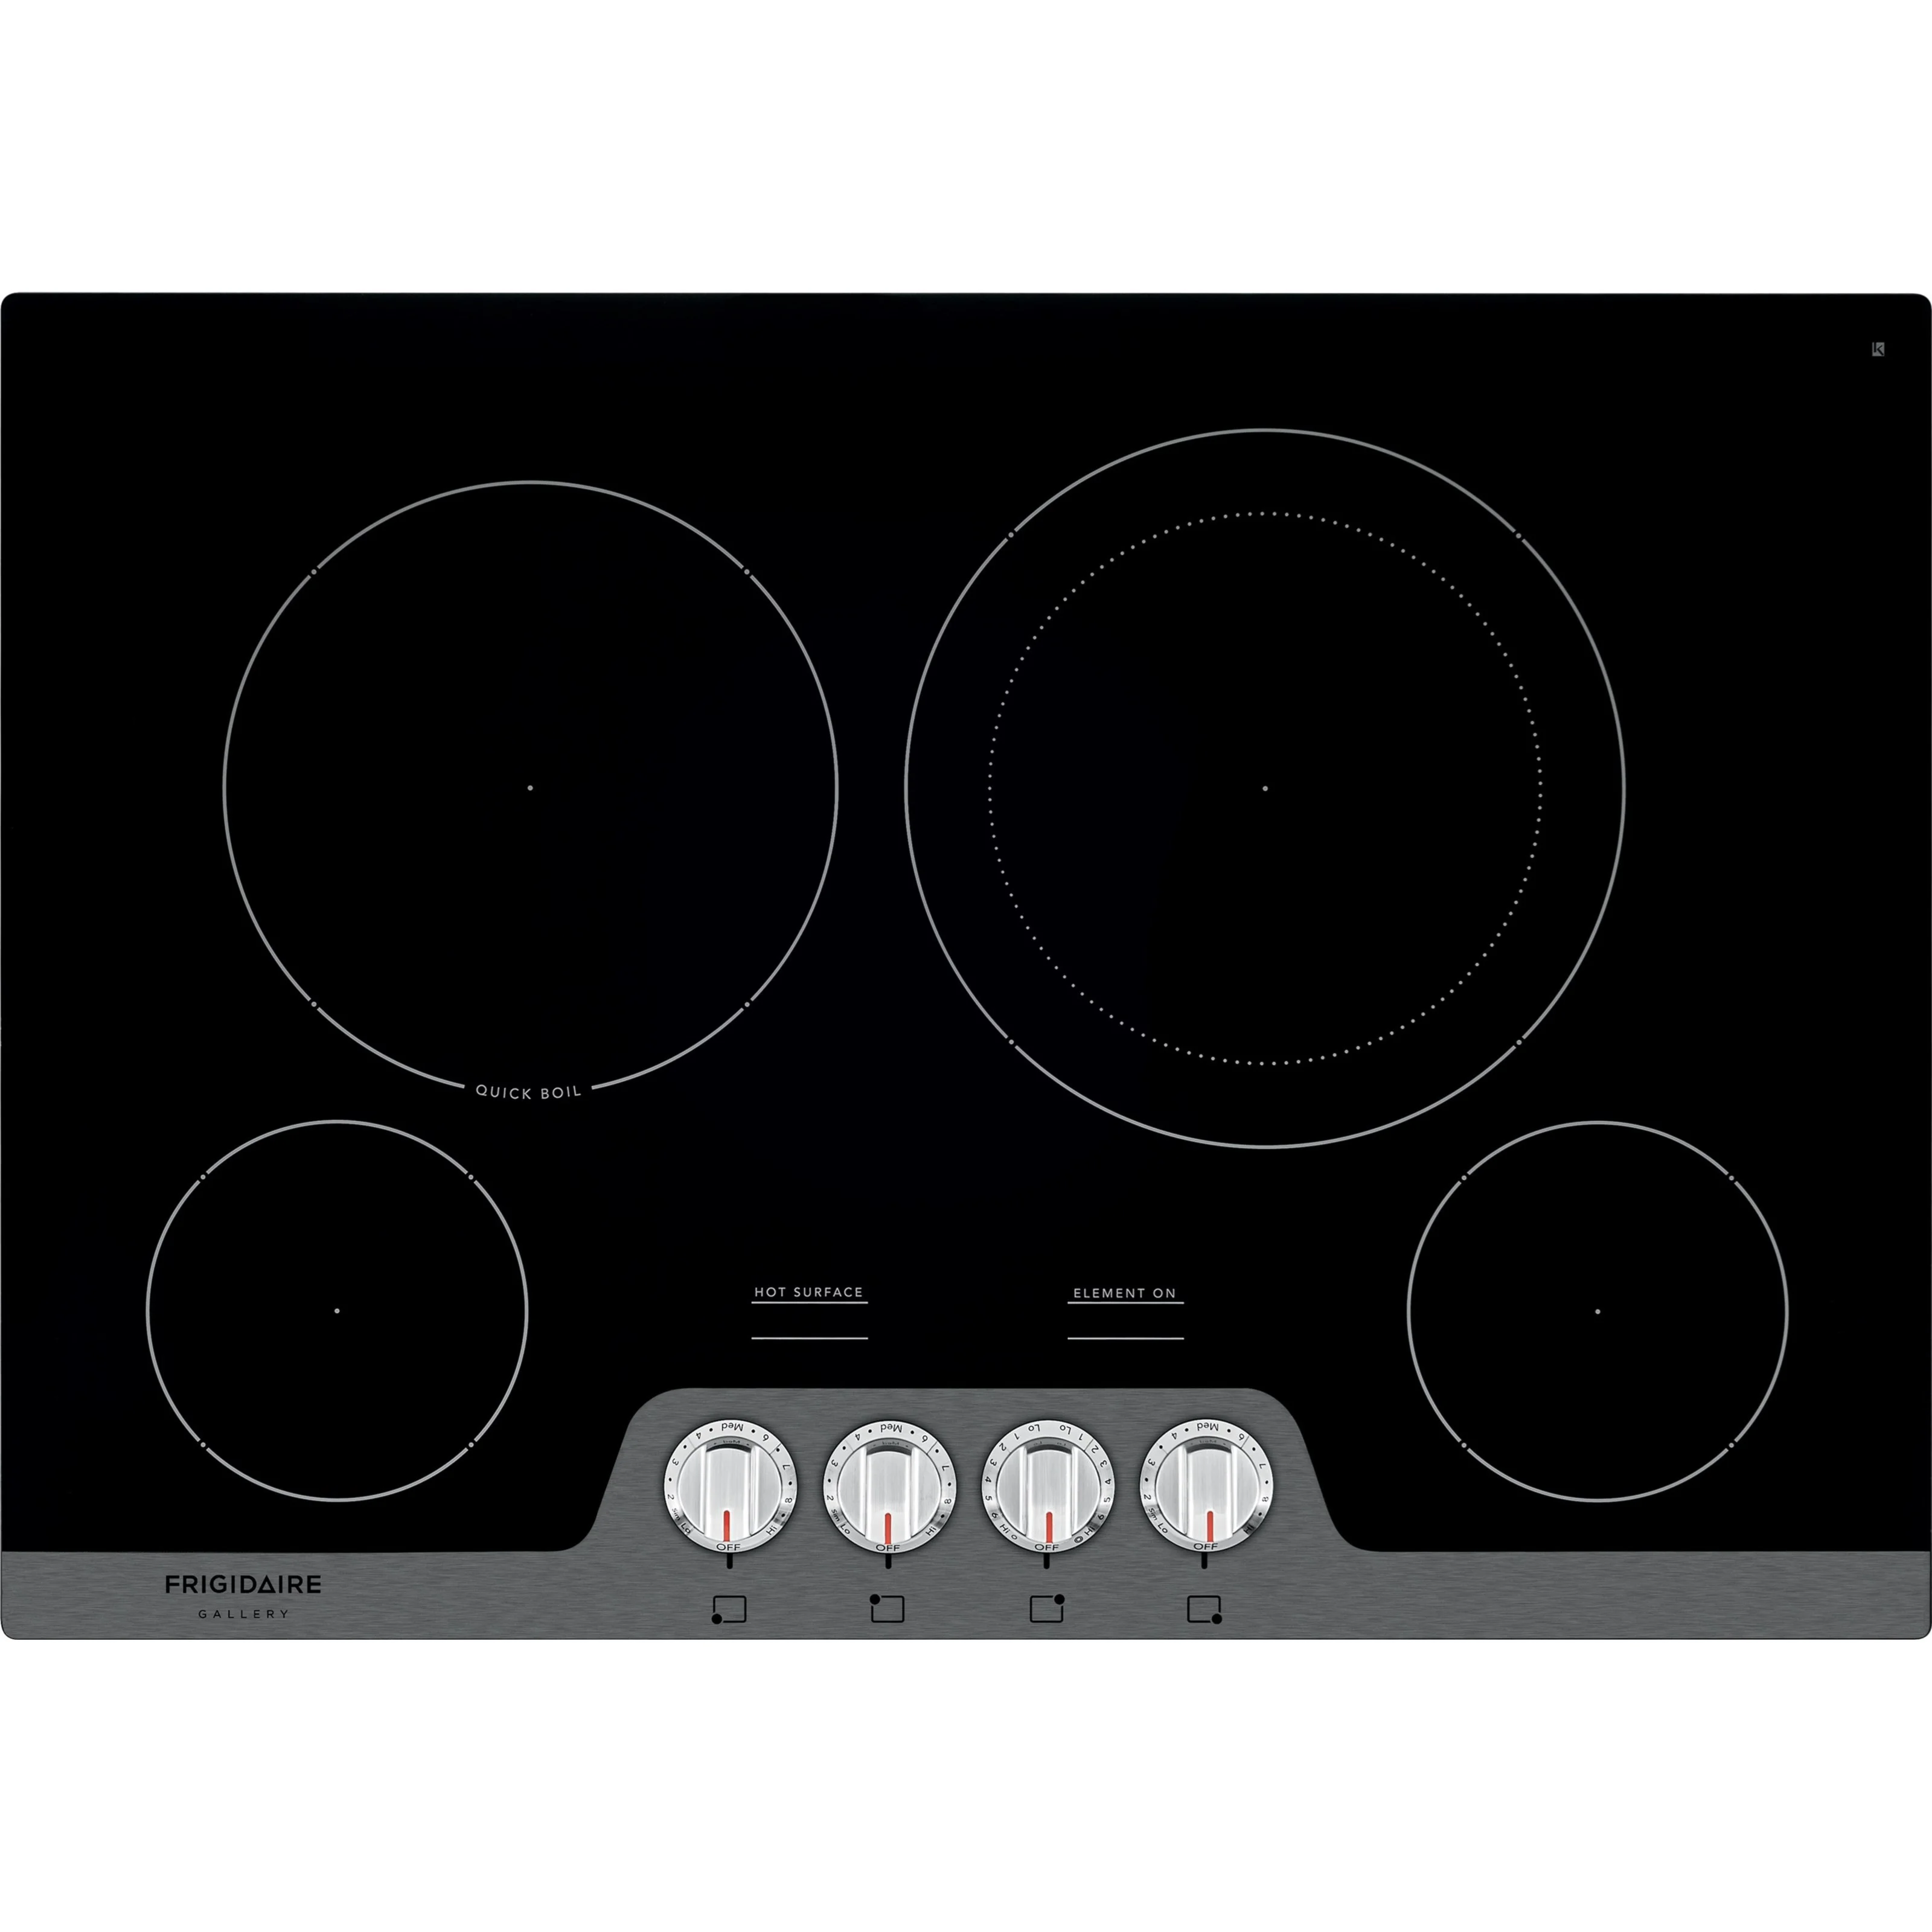 FRIGIDAIRE 30 Electric Stovetop with 4 Element Burners - FFEC3025UB